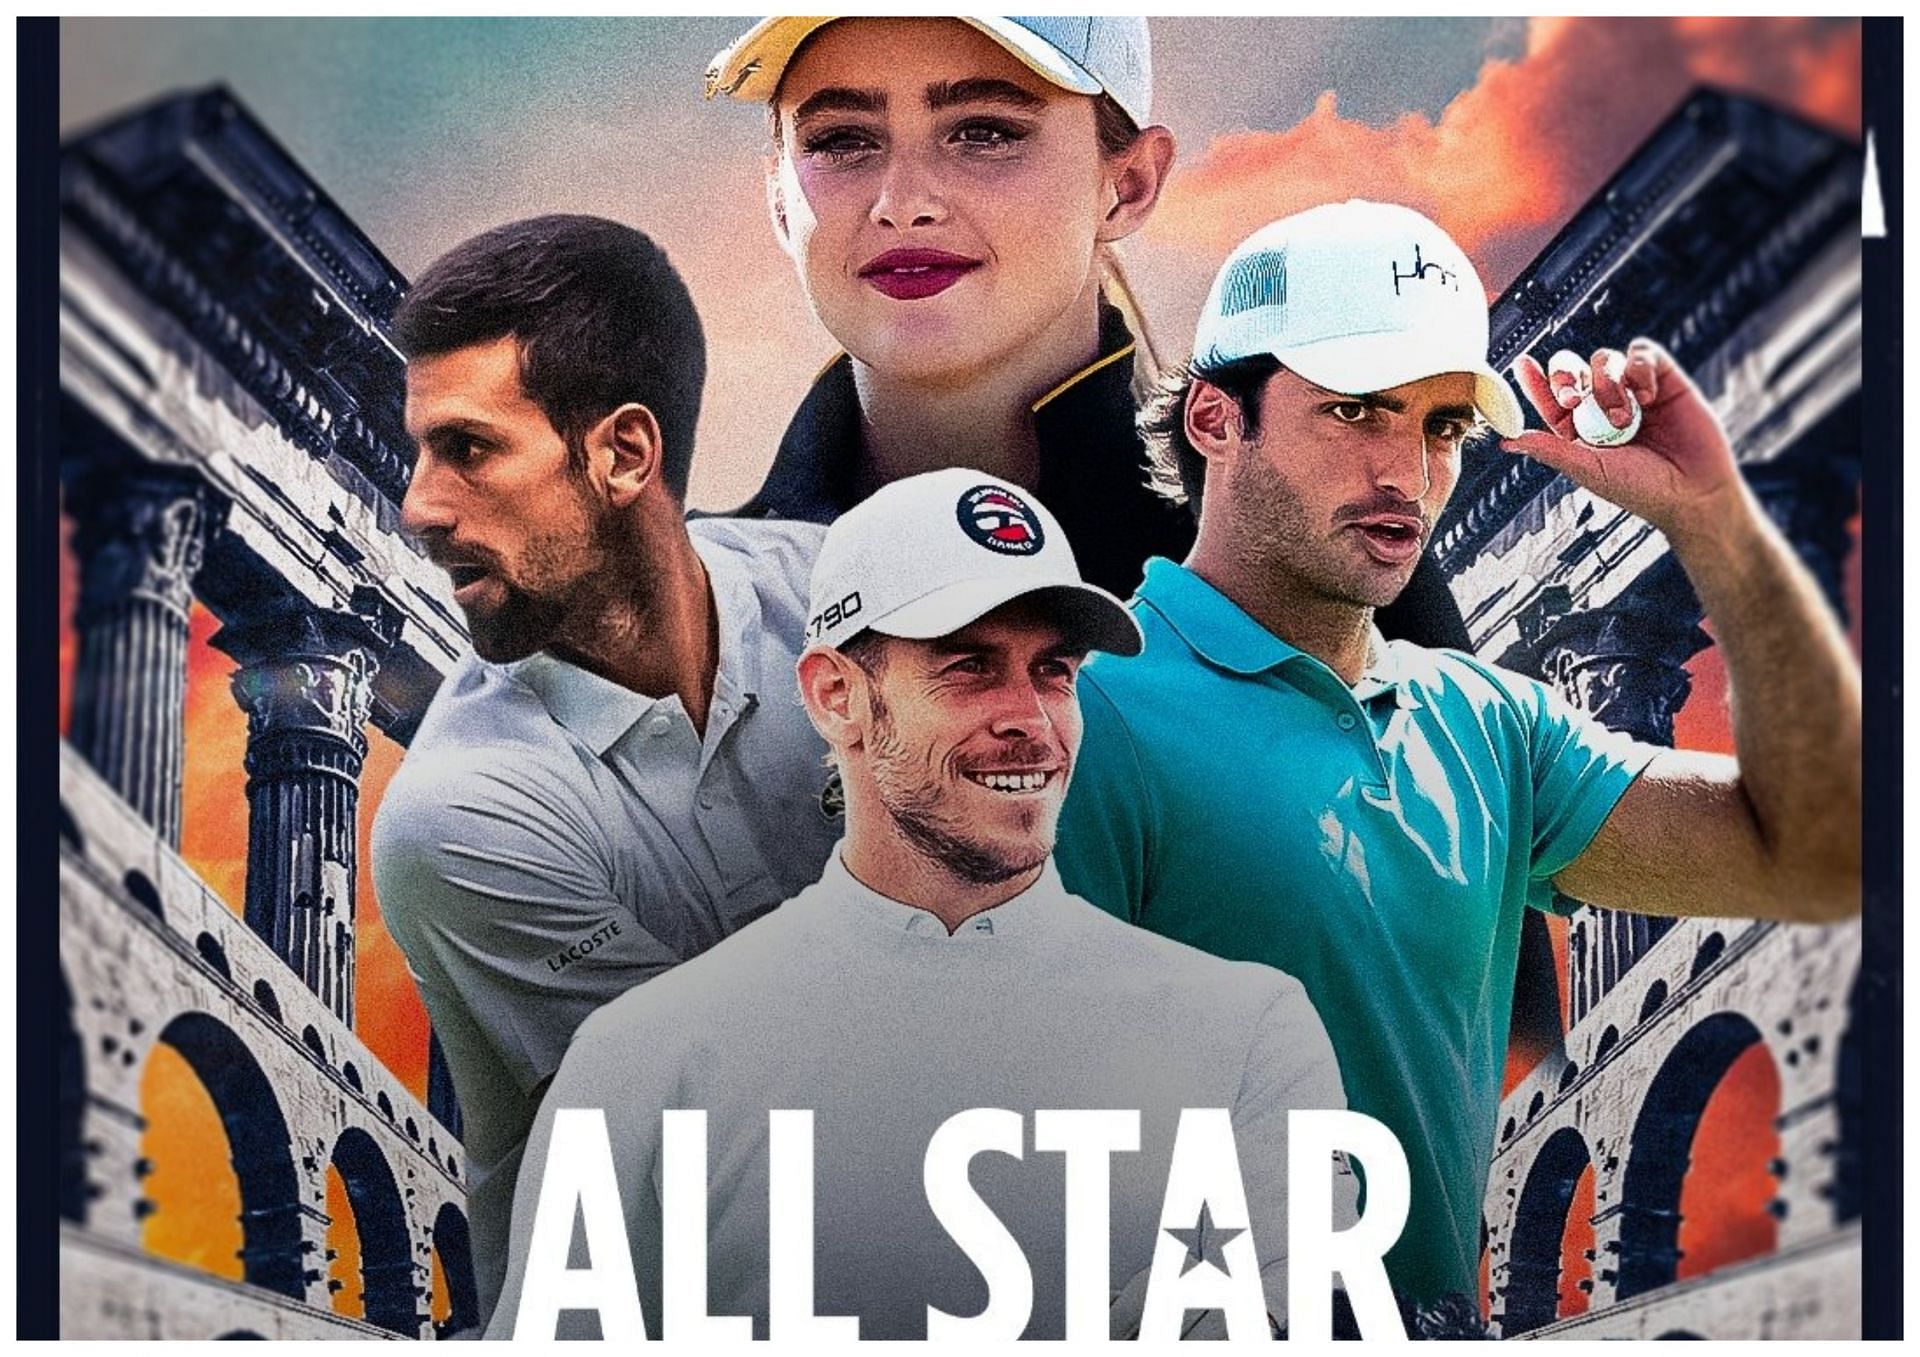 The Ryder Cup All-Star event will take place on Wednesday, September 27 (Image via Twitter.com/Ryder Cup)